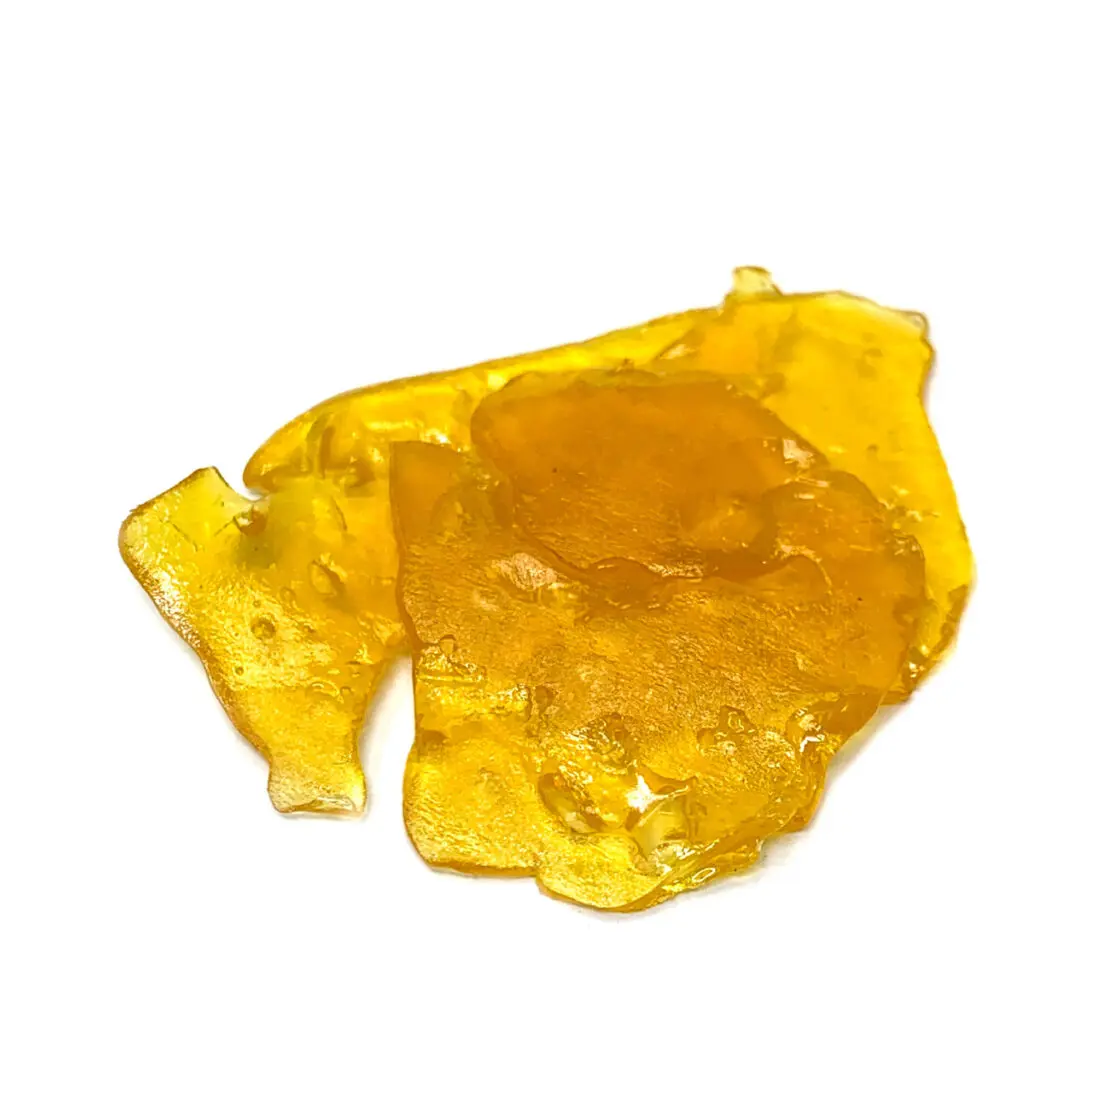 Xo Premium Concentrates – Shatter (2g) – Girl Scout Cookies